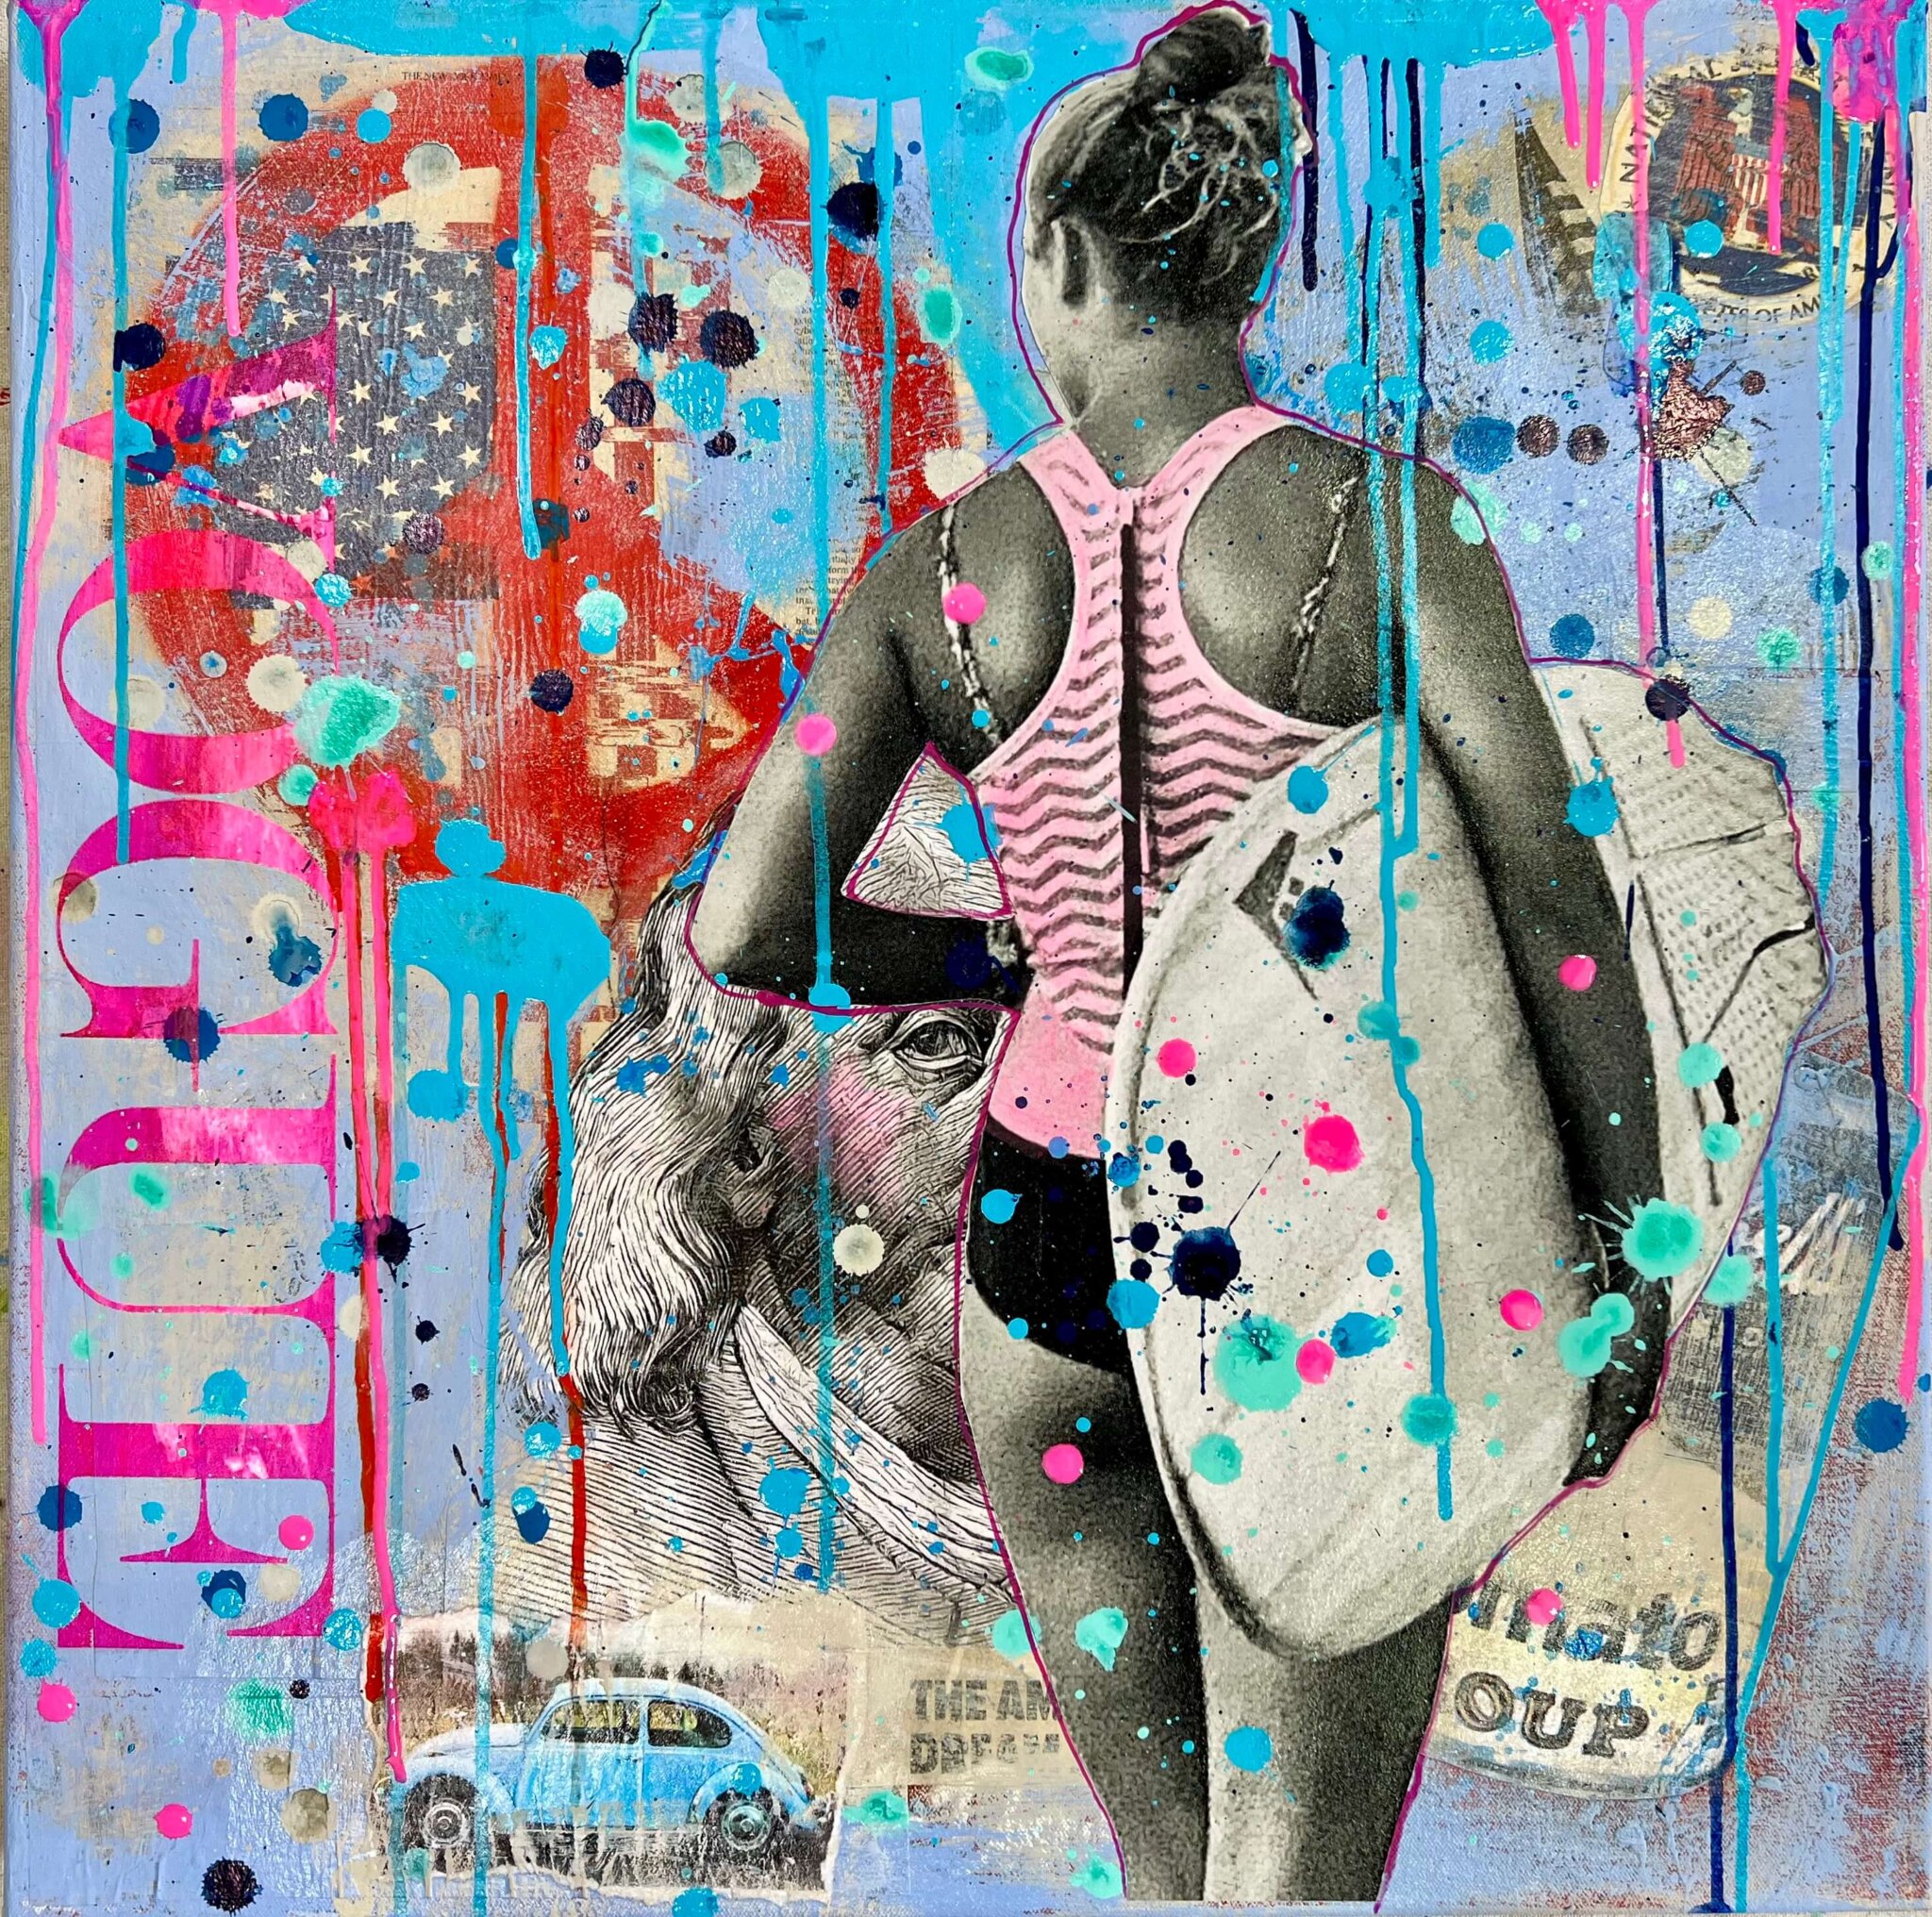 One of Lynn Mara's surfer-themed collages